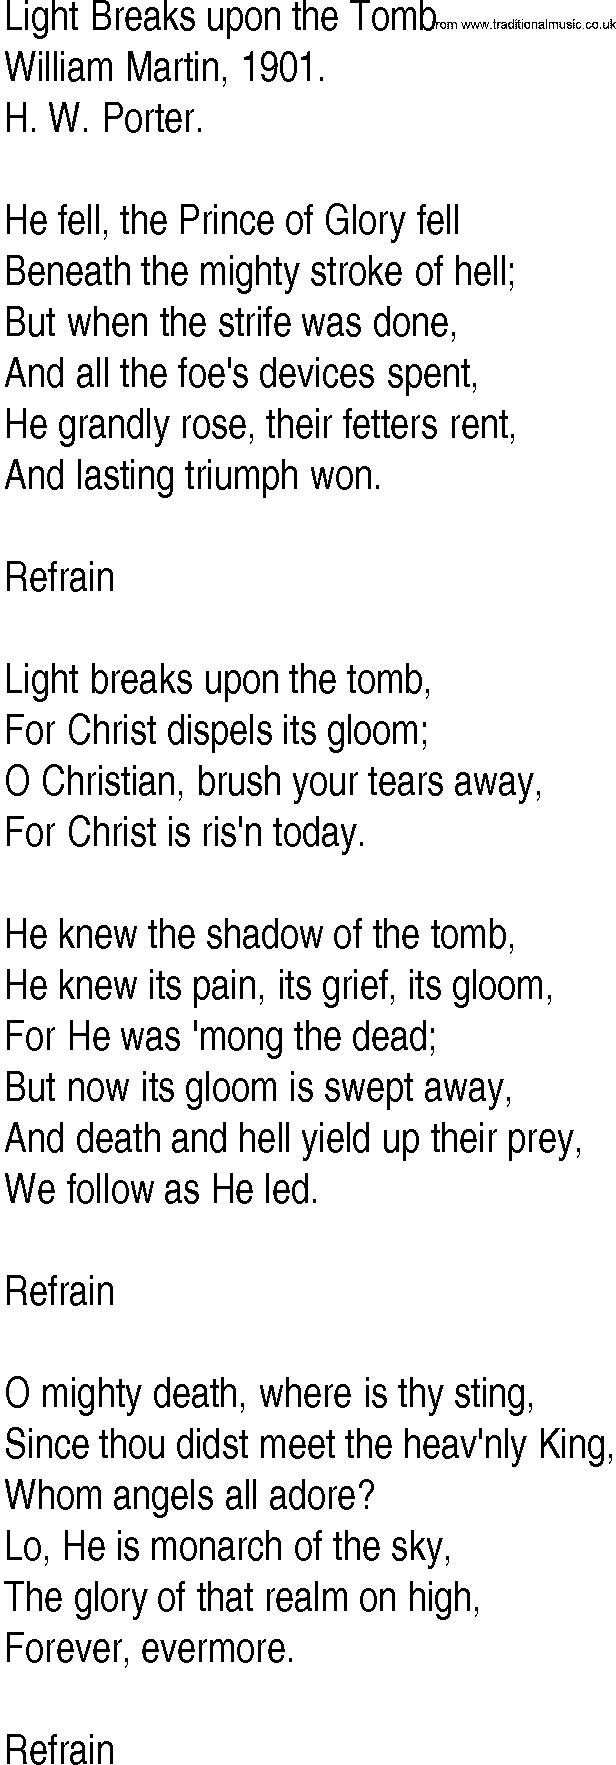 Hymn and Gospel Song: Light Breaks upon the Tomb by William Martin lyrics